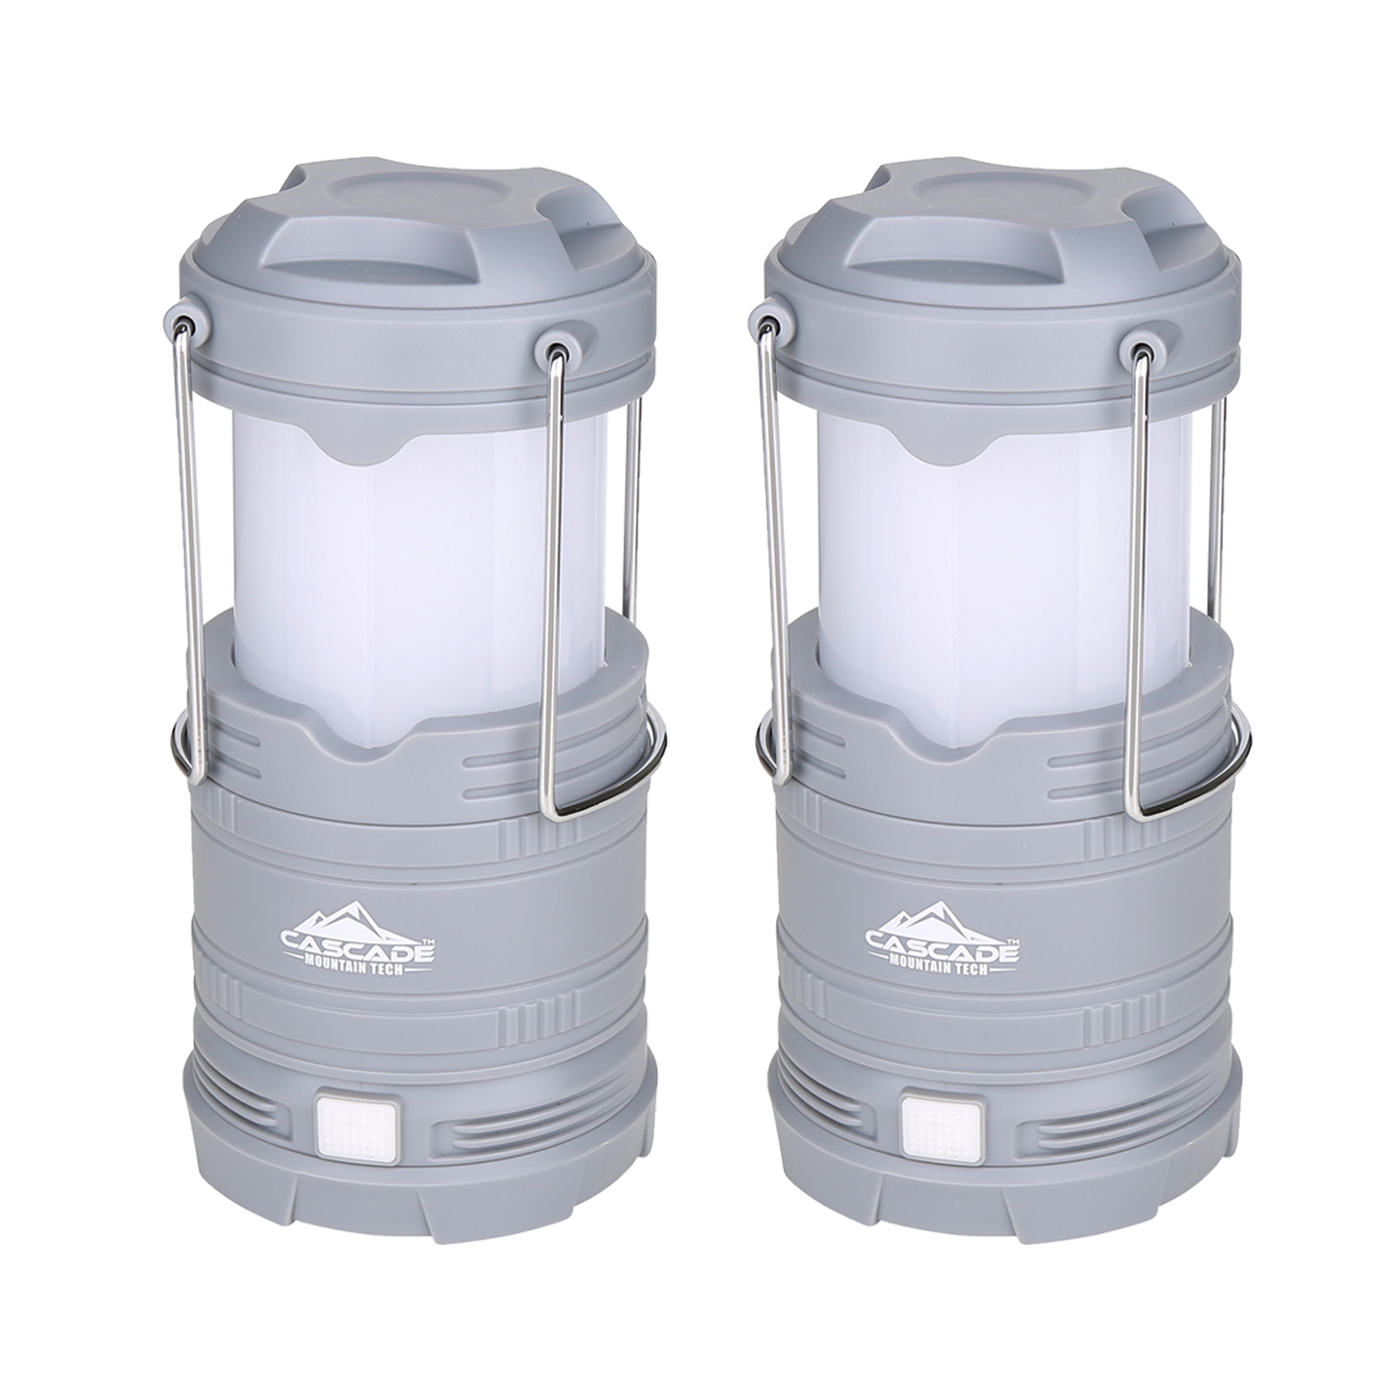 UniqueFire Small Camping Lantern Rechargeable Lanterns 2100 LM 3